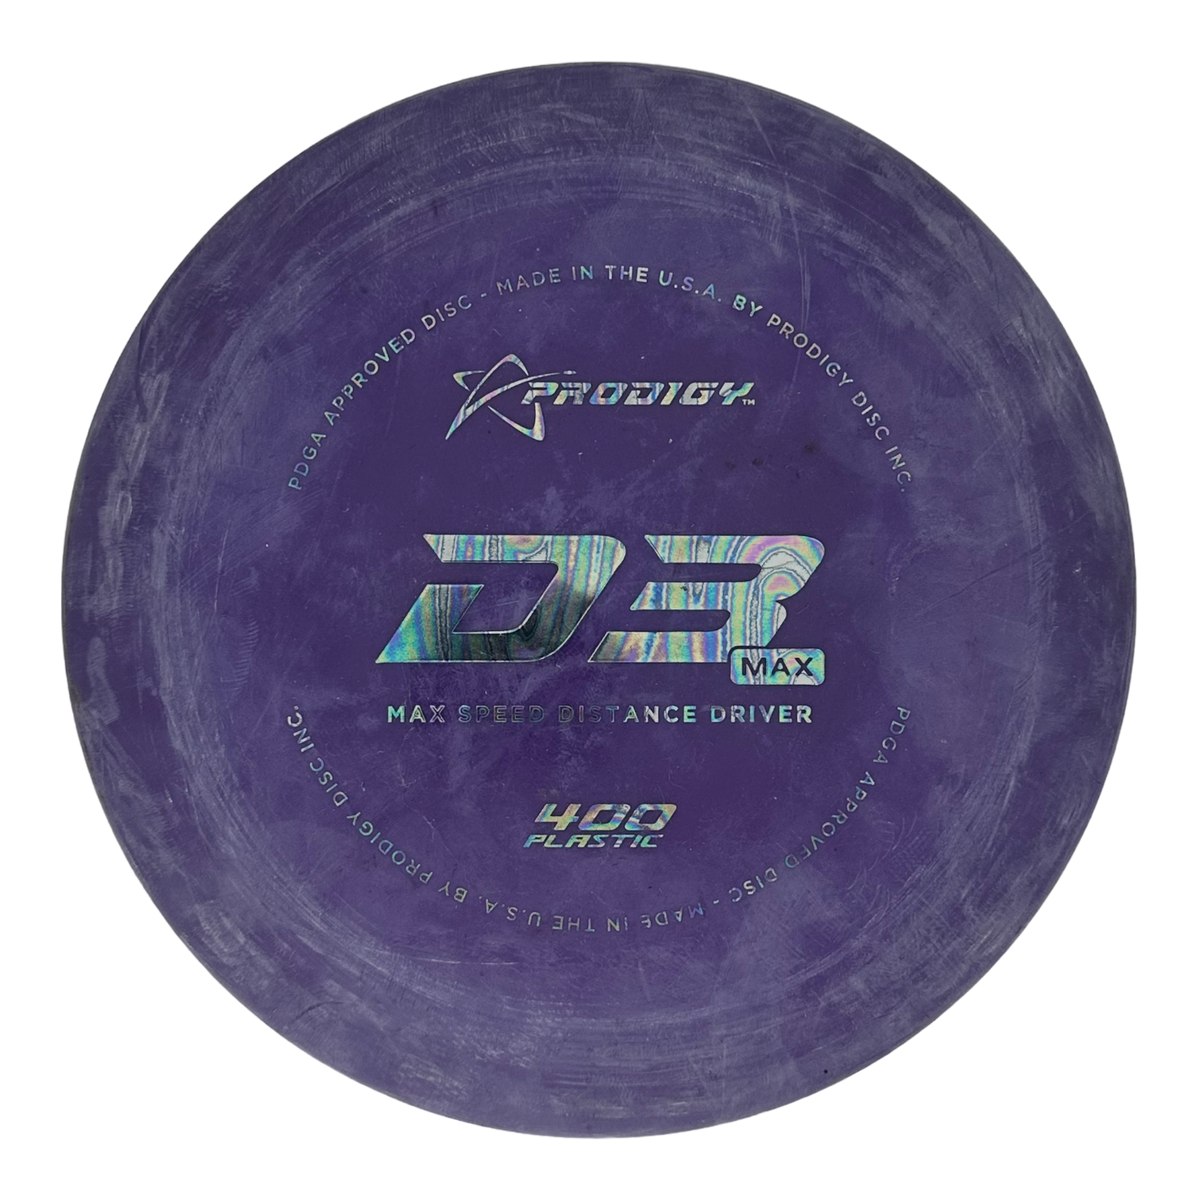 Prodigy Pre-Owned Distance Drivers